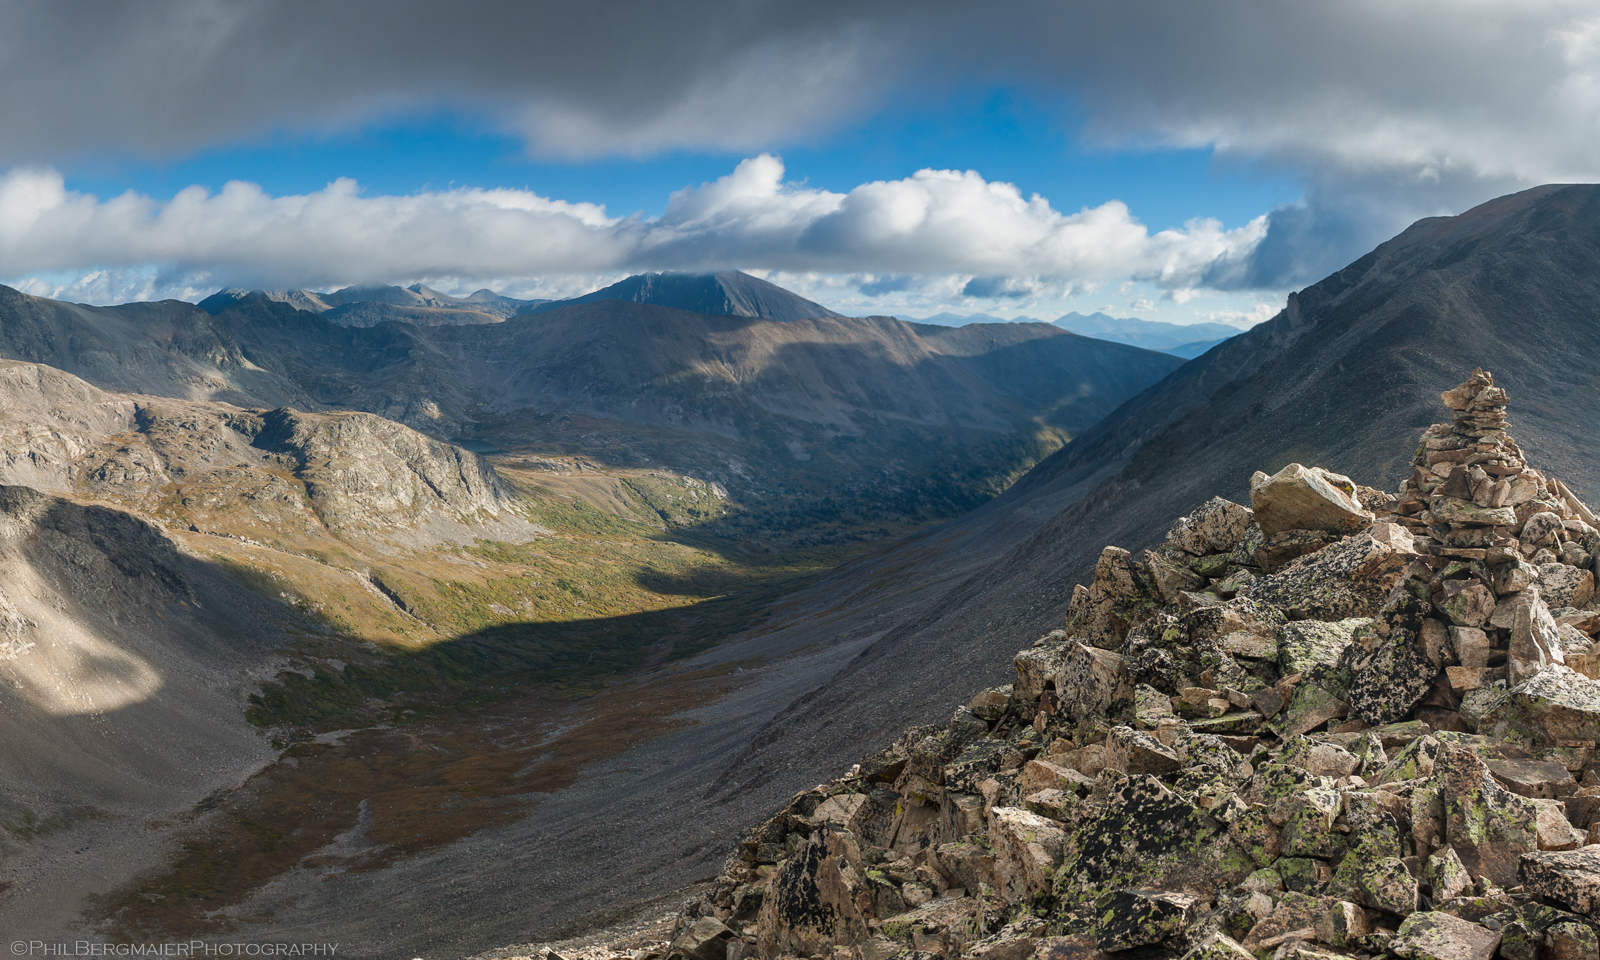 Photo 8 - Another scenic view of 14er Quandary Peak